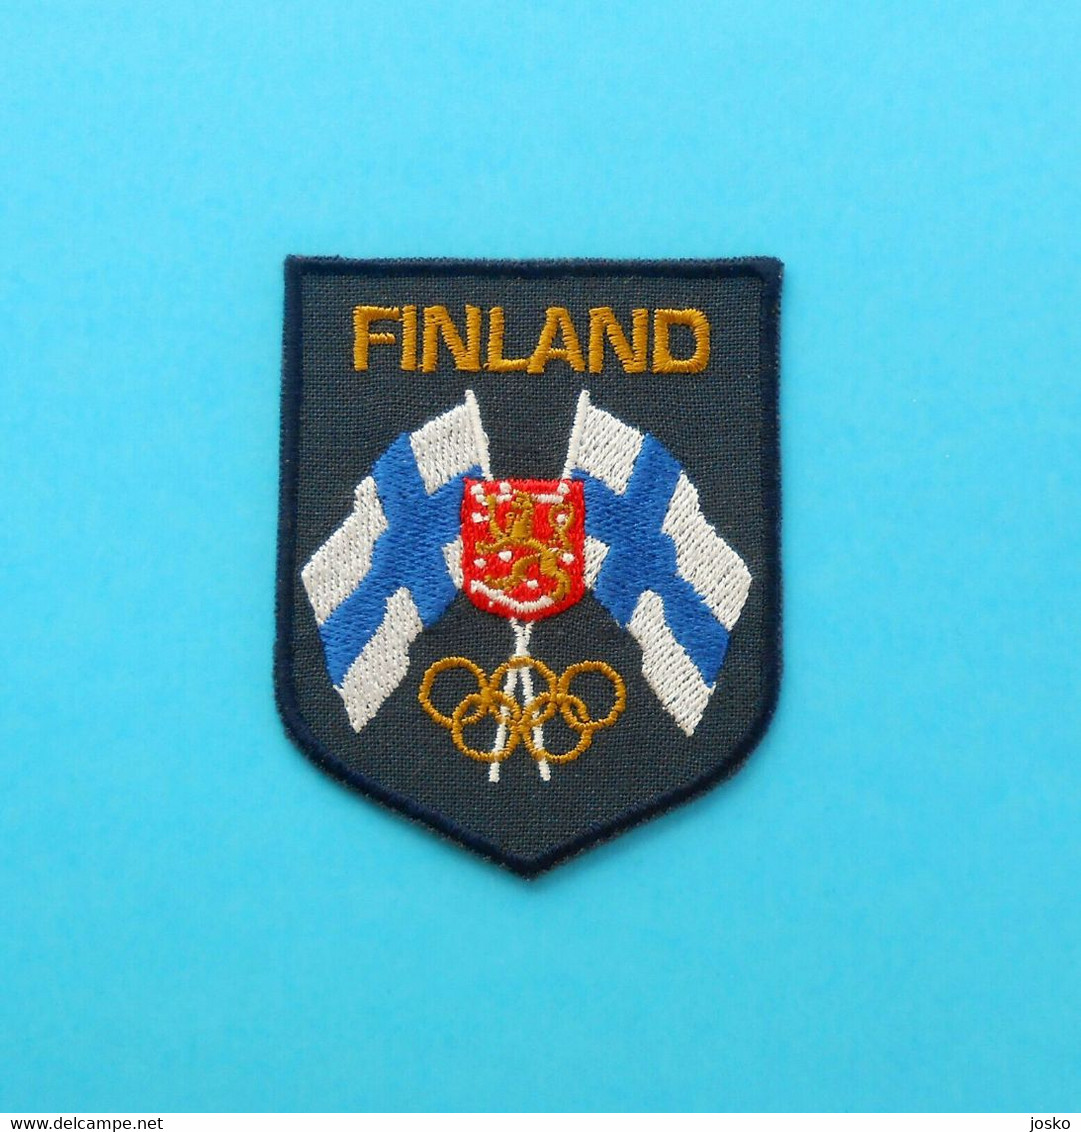 FINLAND NOC - Nice Rare Olympics Patch * Olympic Games Olympiad Olympia Olympiade Olimpische Spiele Olimpici - Apparel, Souvenirs & Other